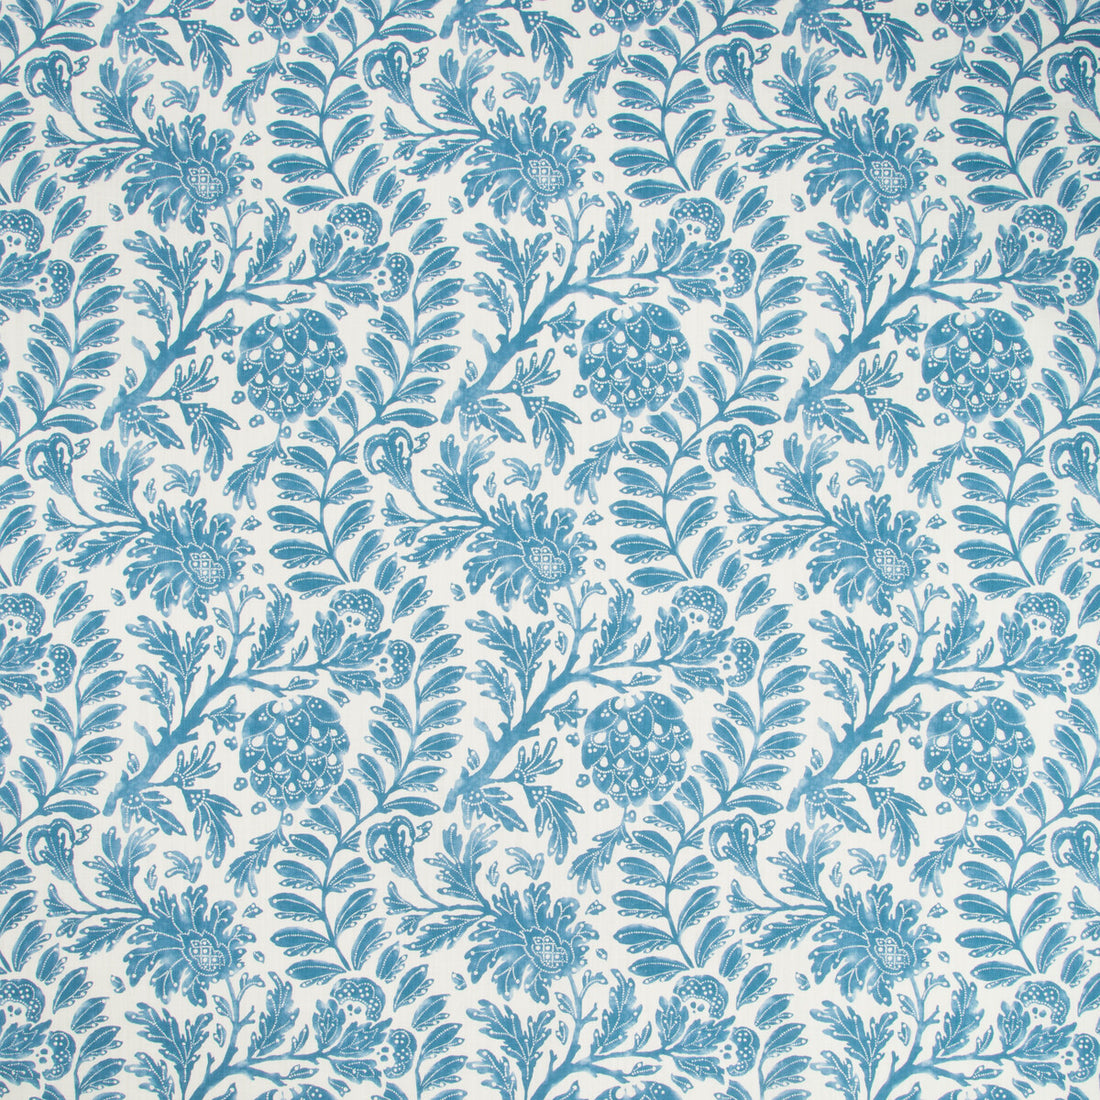 Wollerton fabric in cornflower color - pattern WOLLERTON.5.0 - by Kravet Basics in the Greenwich collection